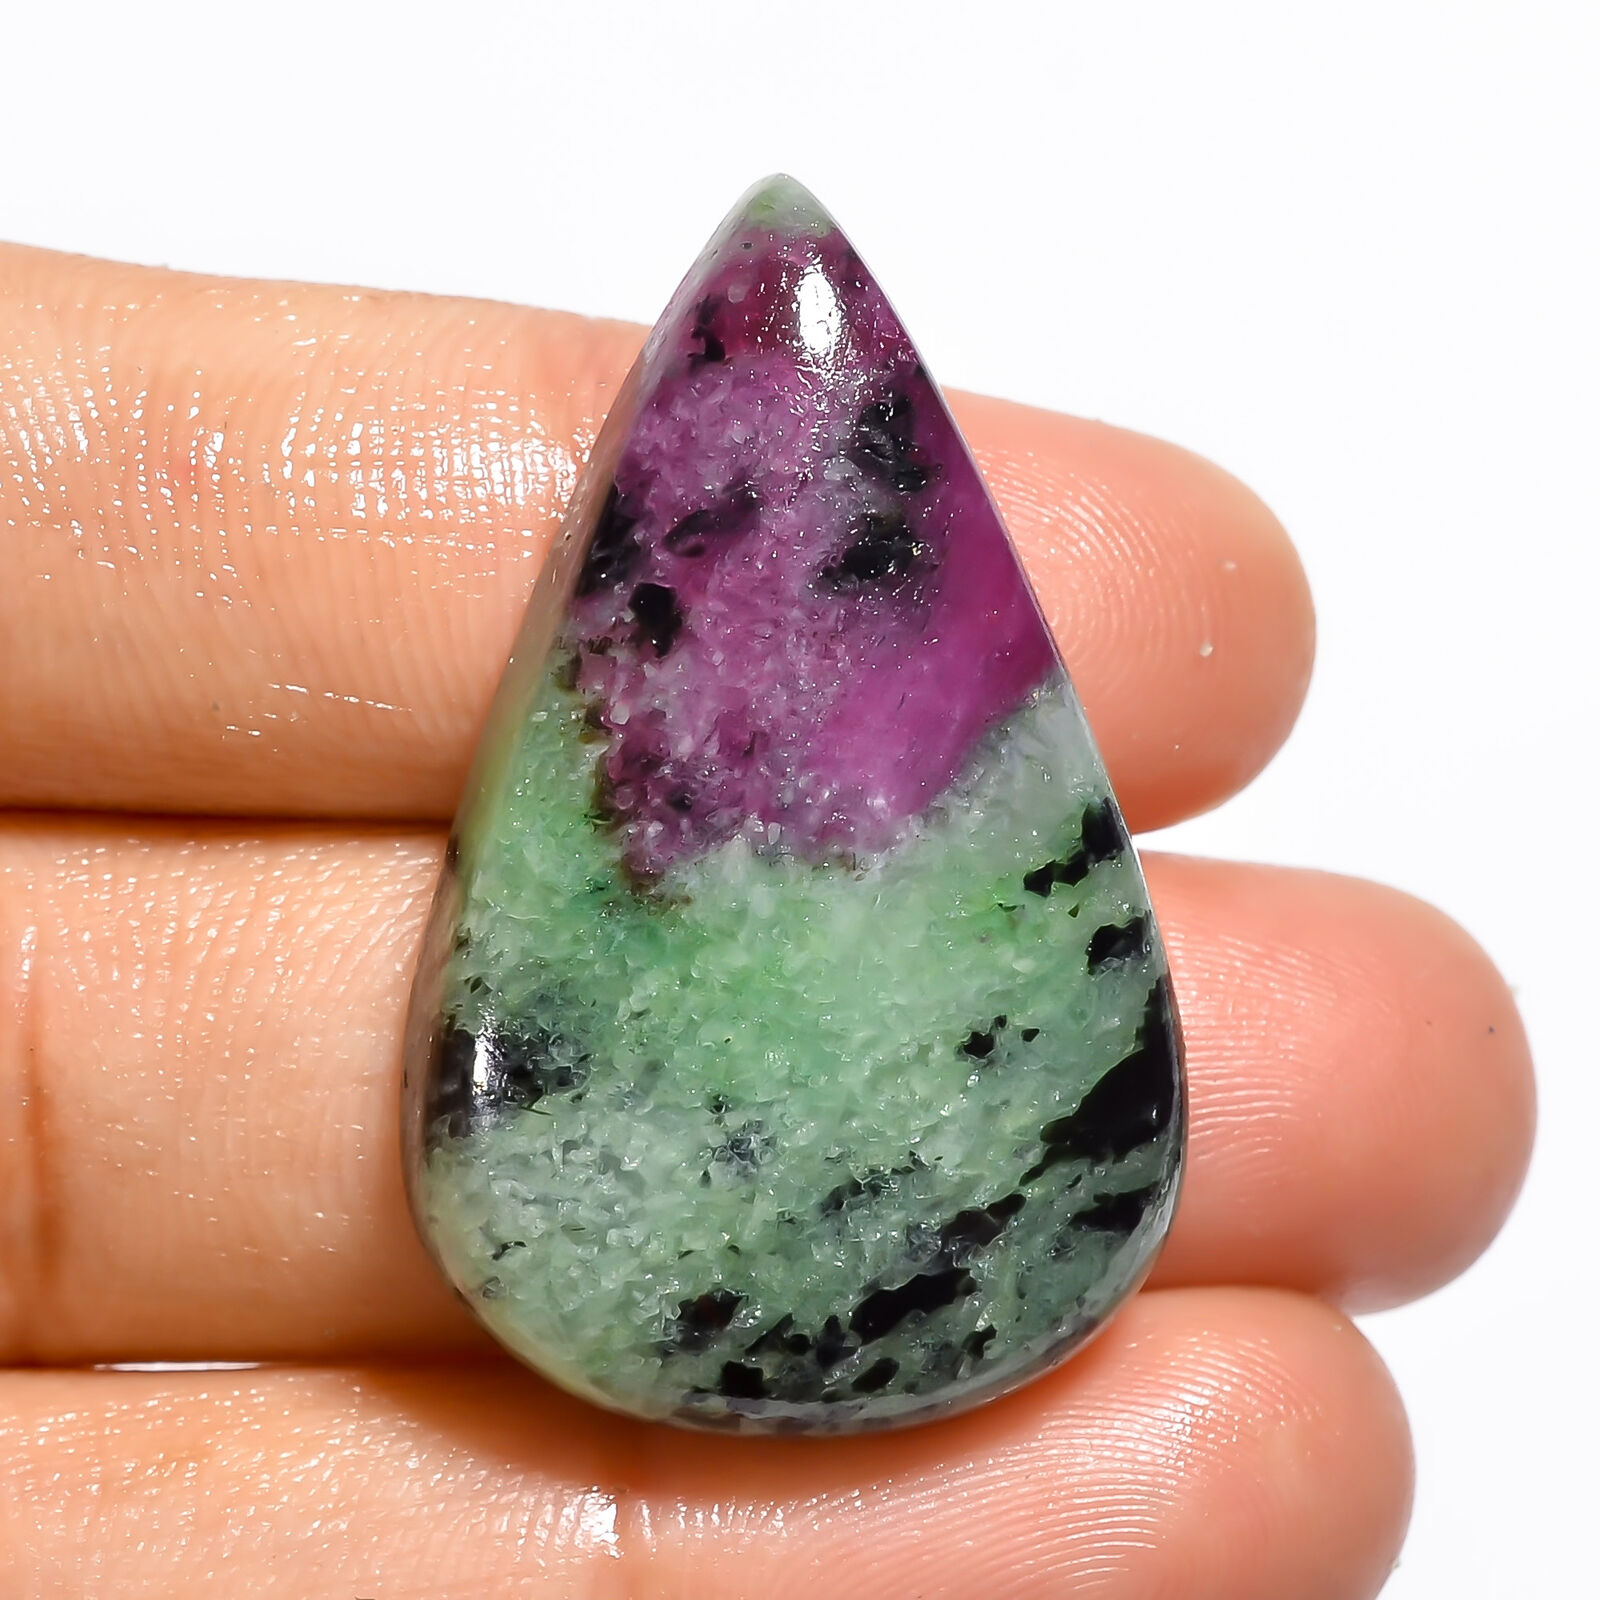 Aaa+ Natural Ruby Zoisite Pear Shape Cabochon Loose Gemstone 50.5 Ct. 36x23x7 Mm